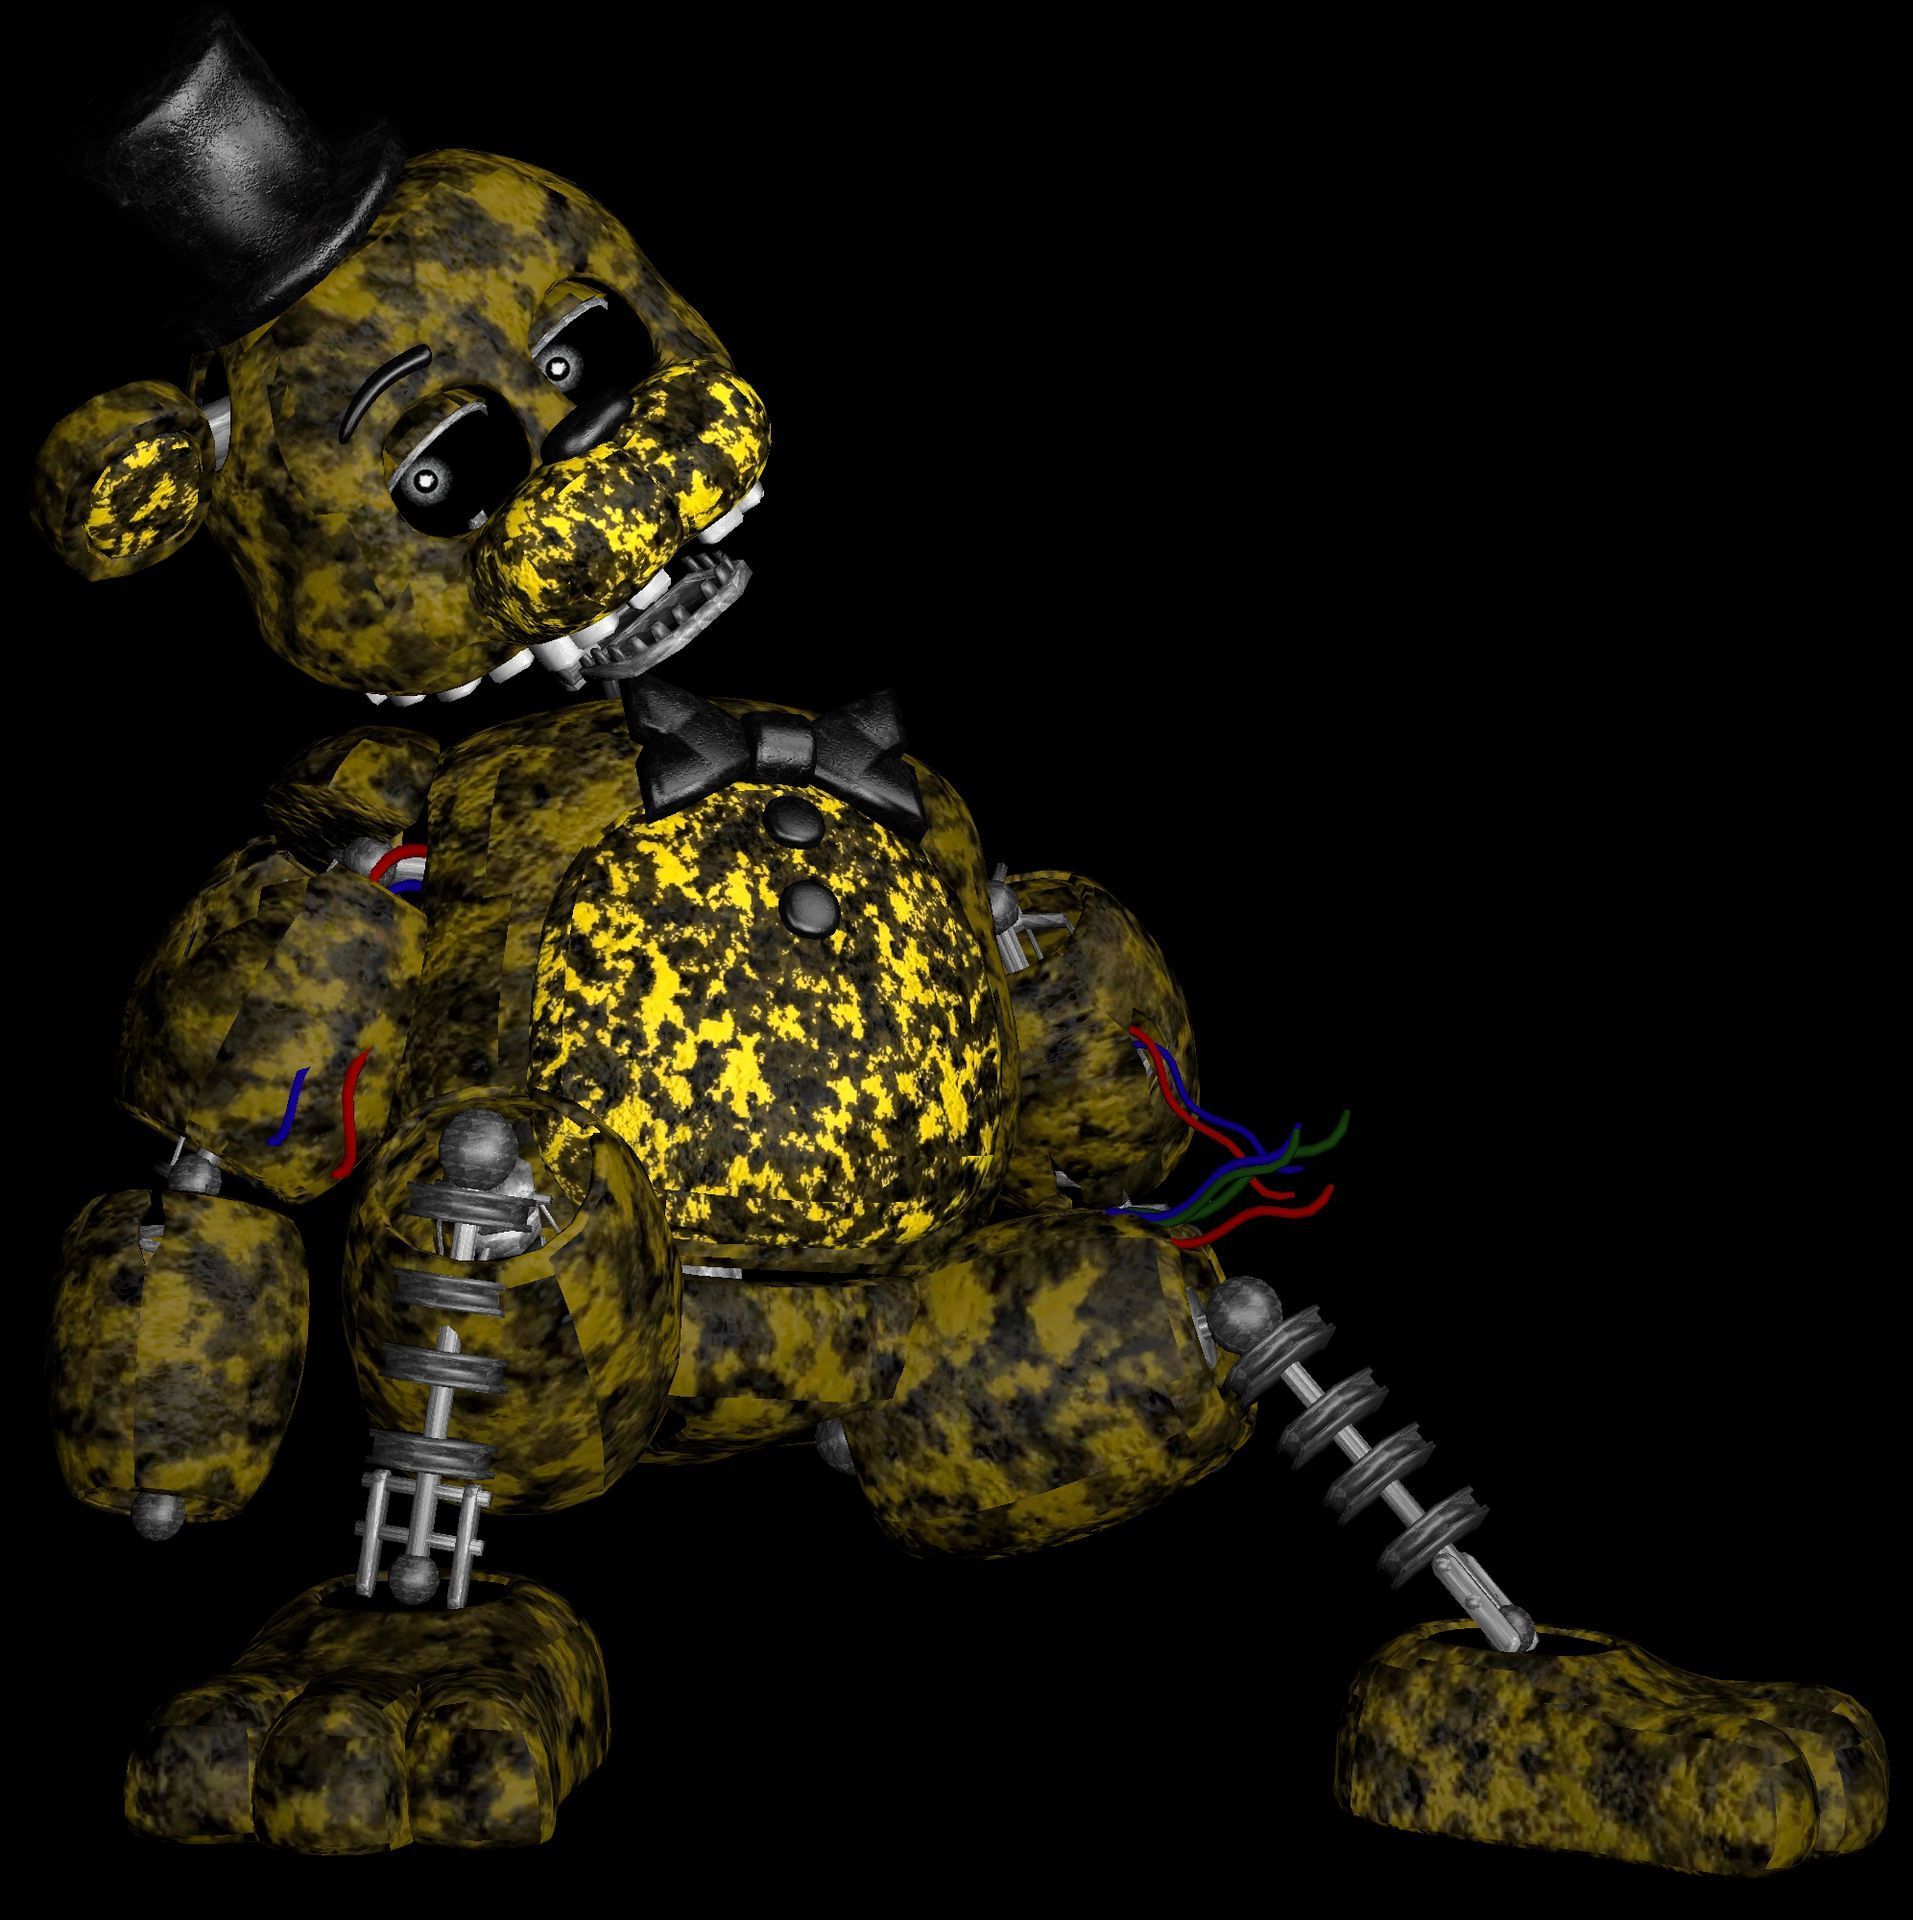 TJOC:R - Ignited Bonnie by TF541Productions  Fnaf jumpscares, Fnaf  wallpapers, Five nights at freddy's